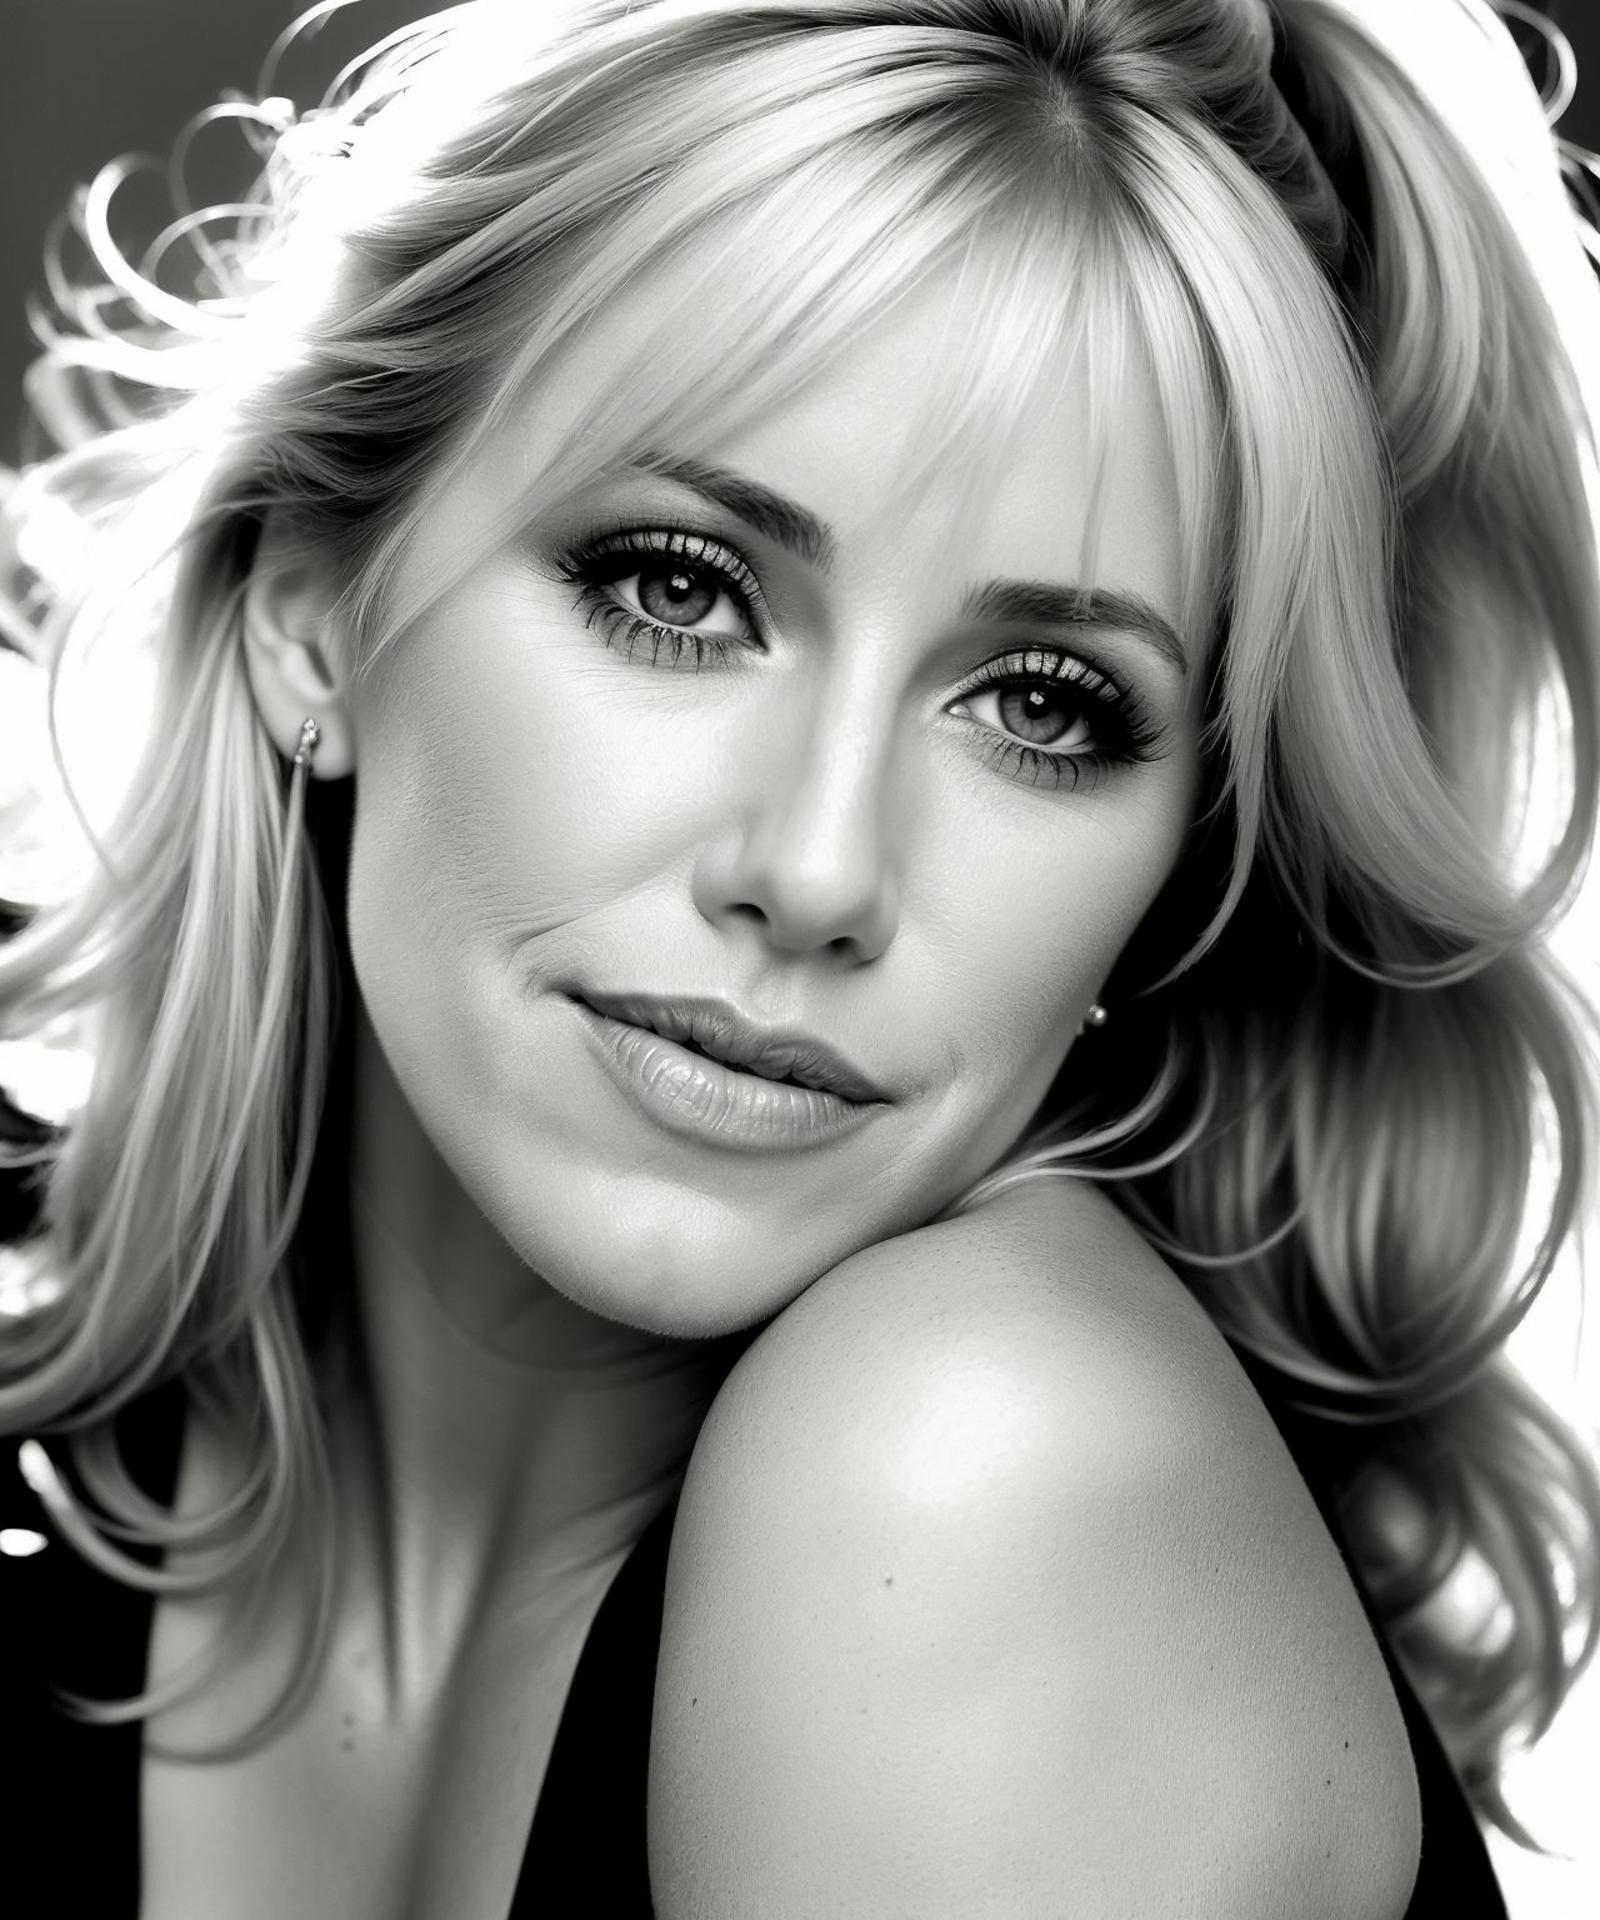 Suzanne Somers image by ManOfCulture